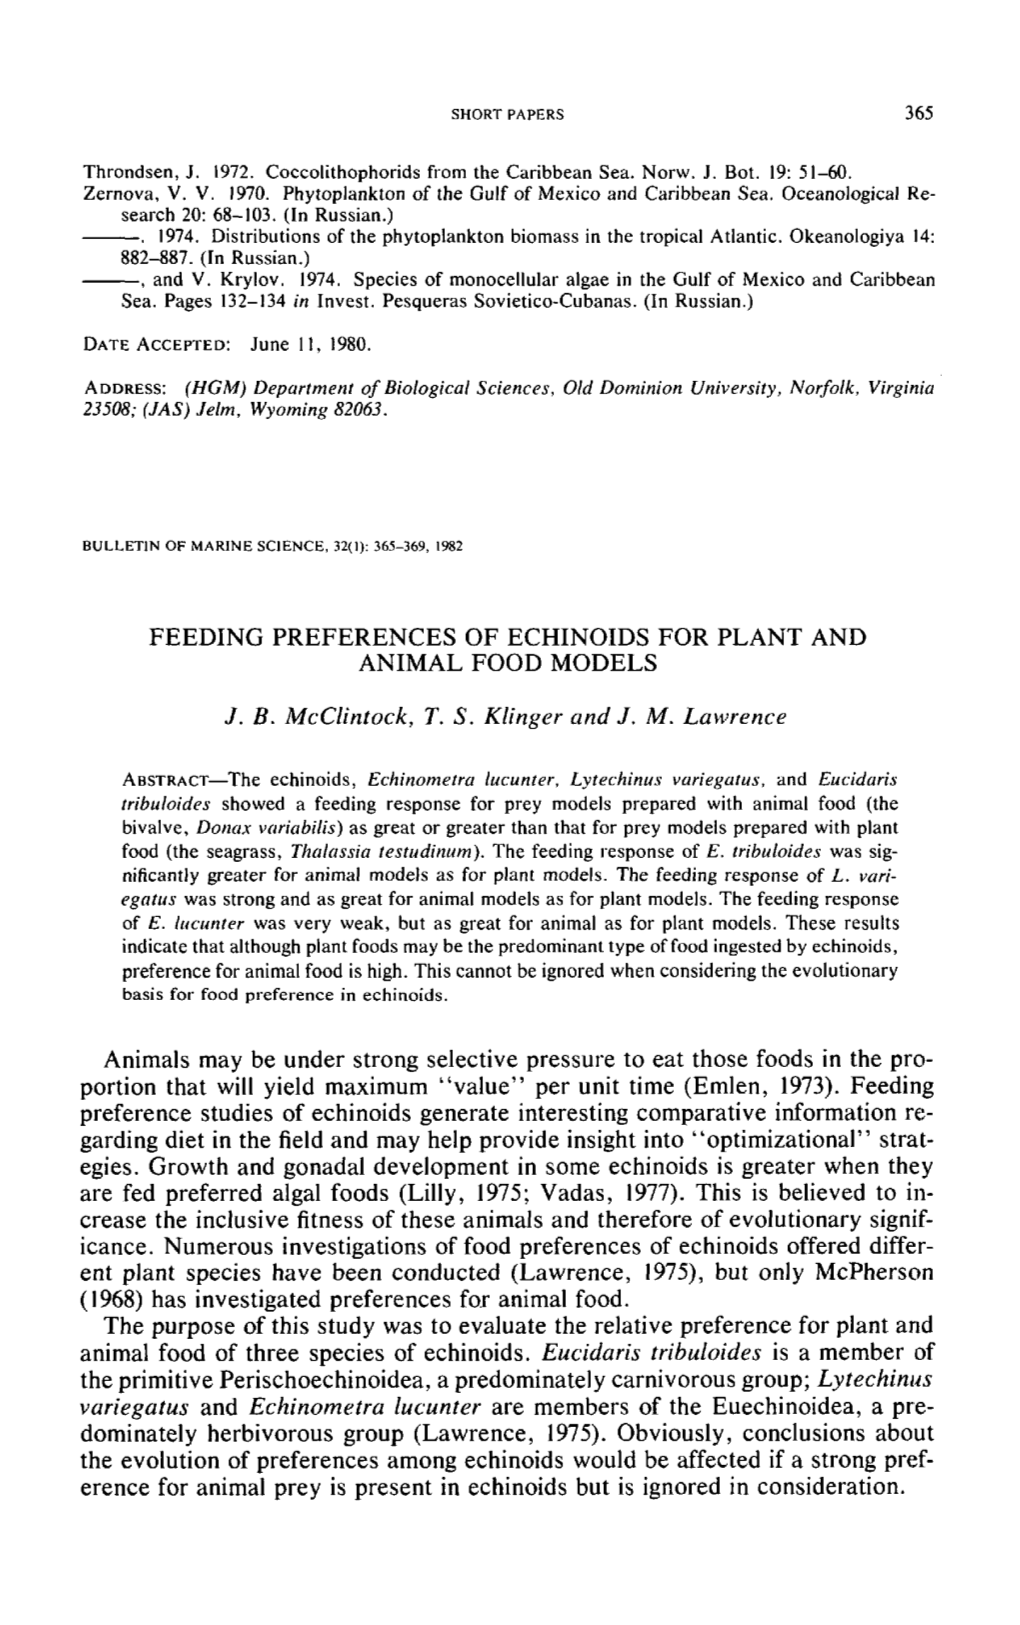 Feeding Preferences of Echinoids for Plant and Animal Food Models